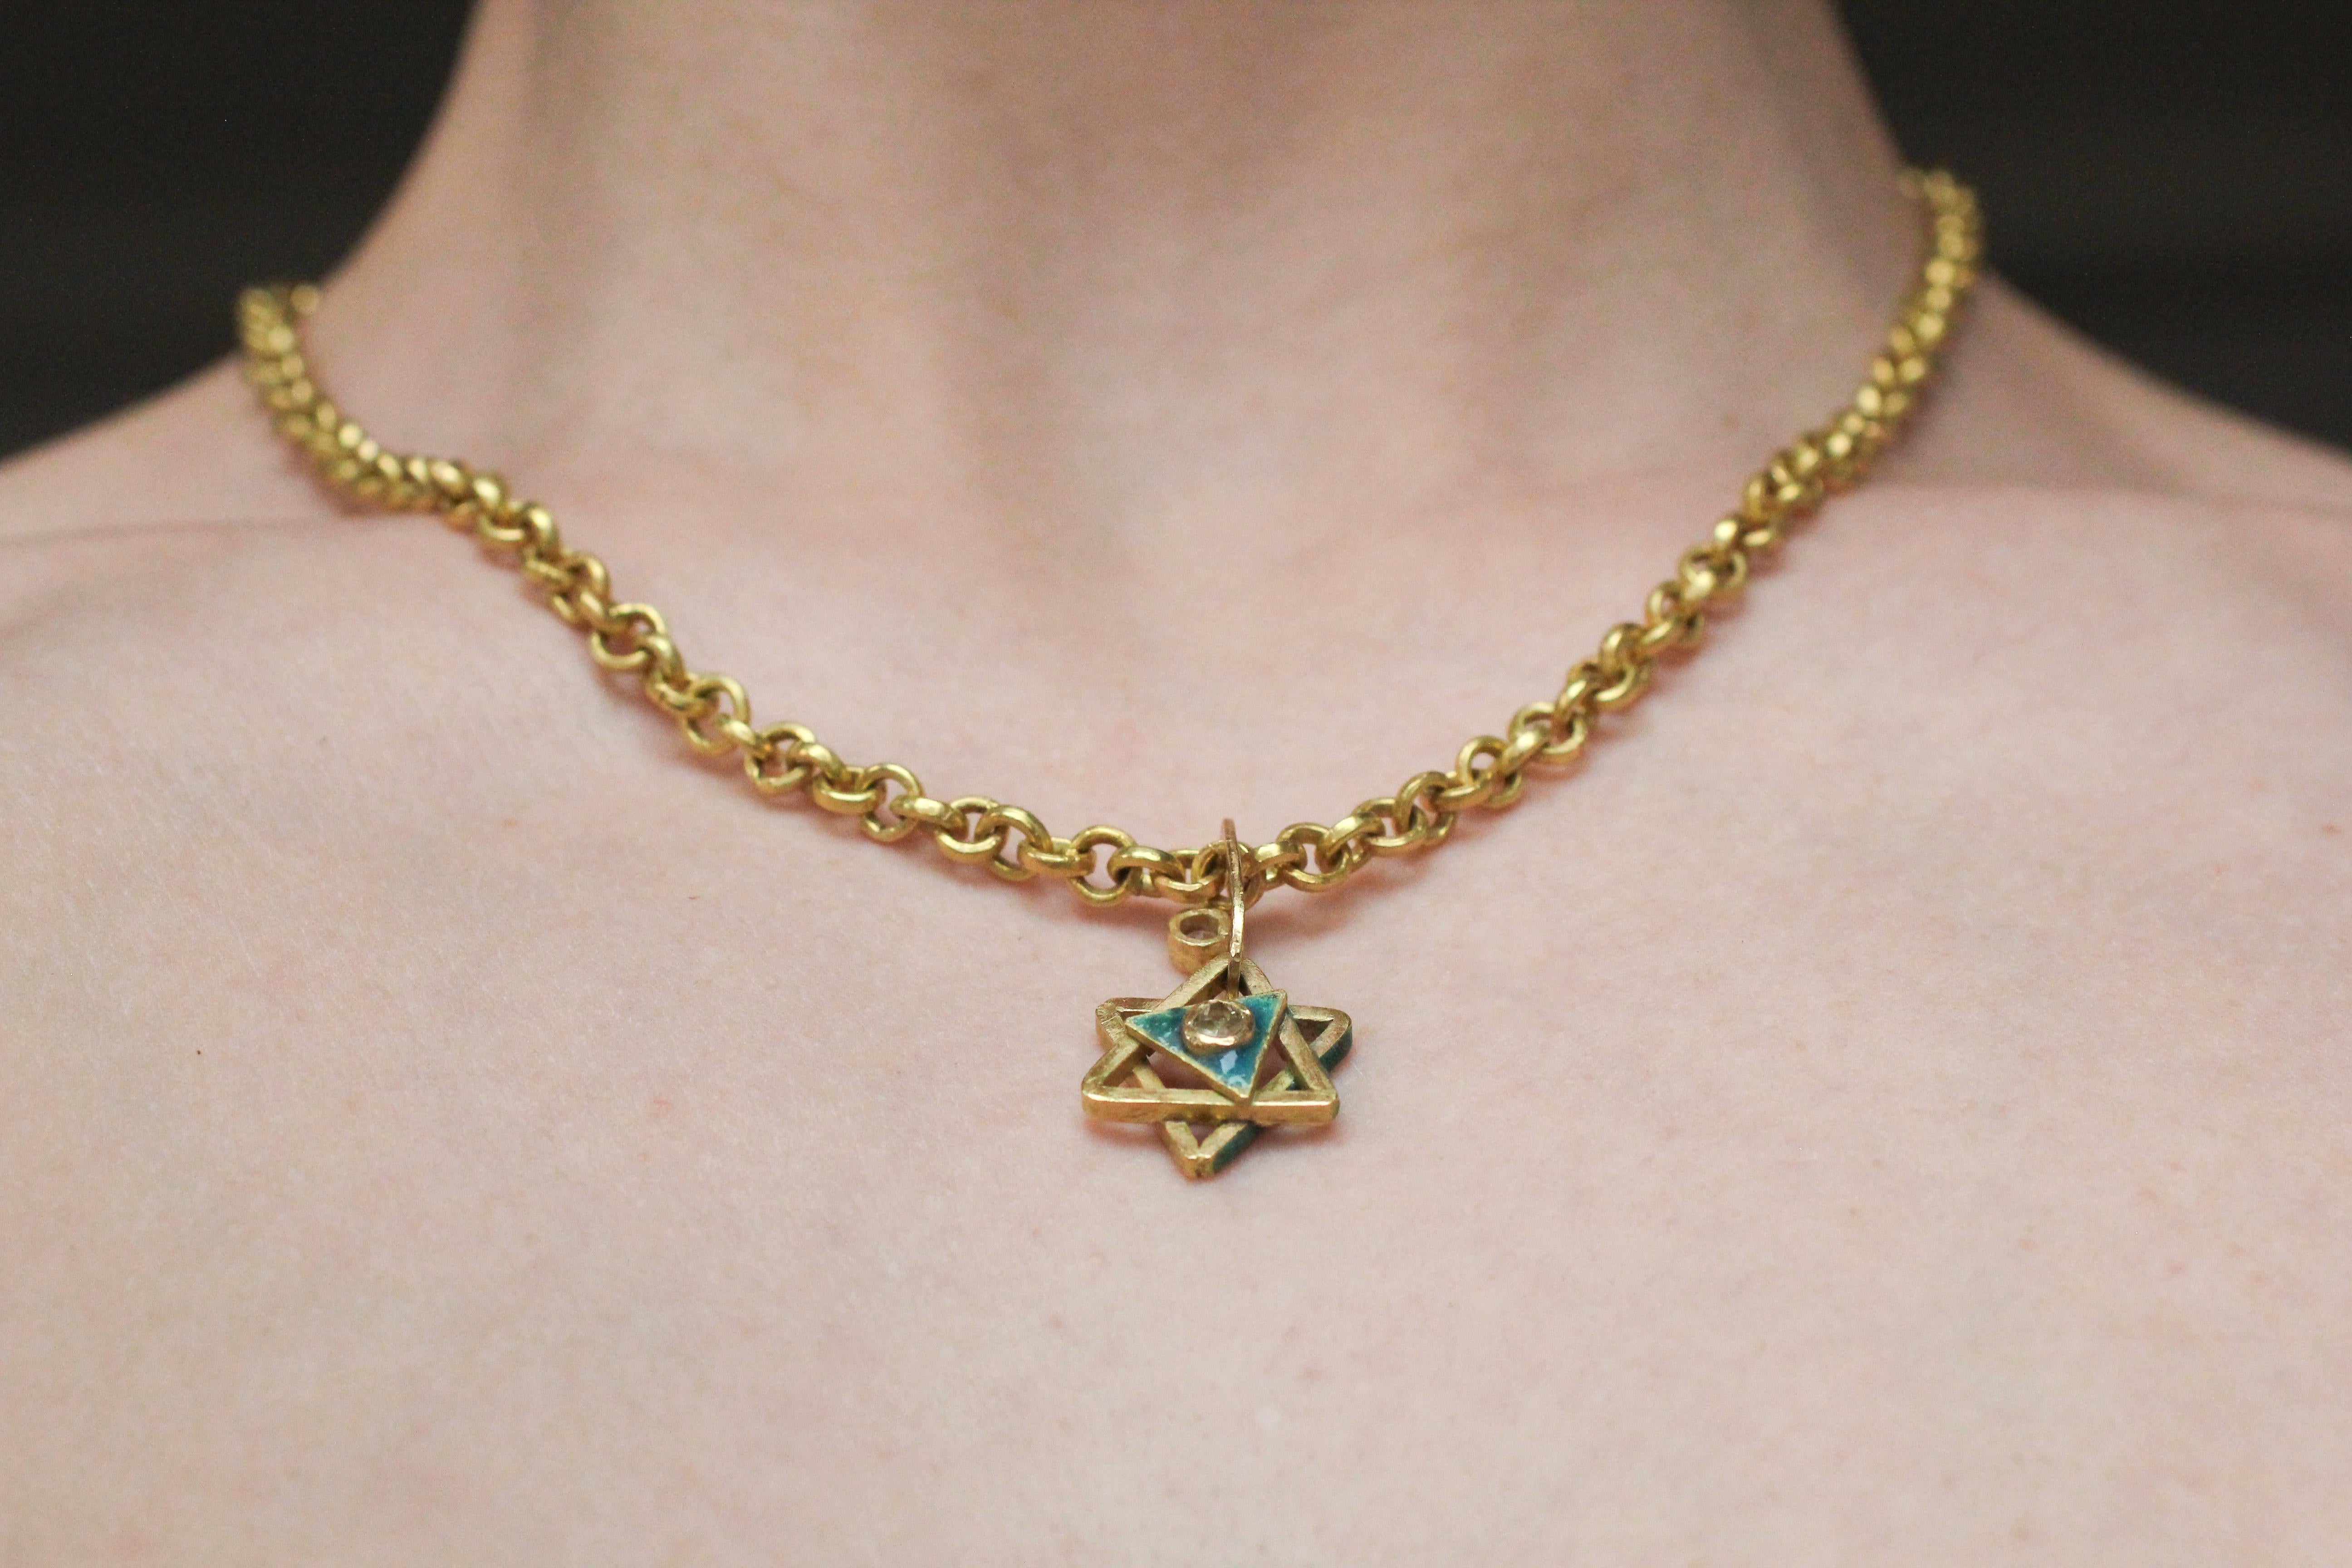 Enamel Magen David 18K Gold Chain Necklace Diamond Enhancer and Toggle Clasp For Sale 14